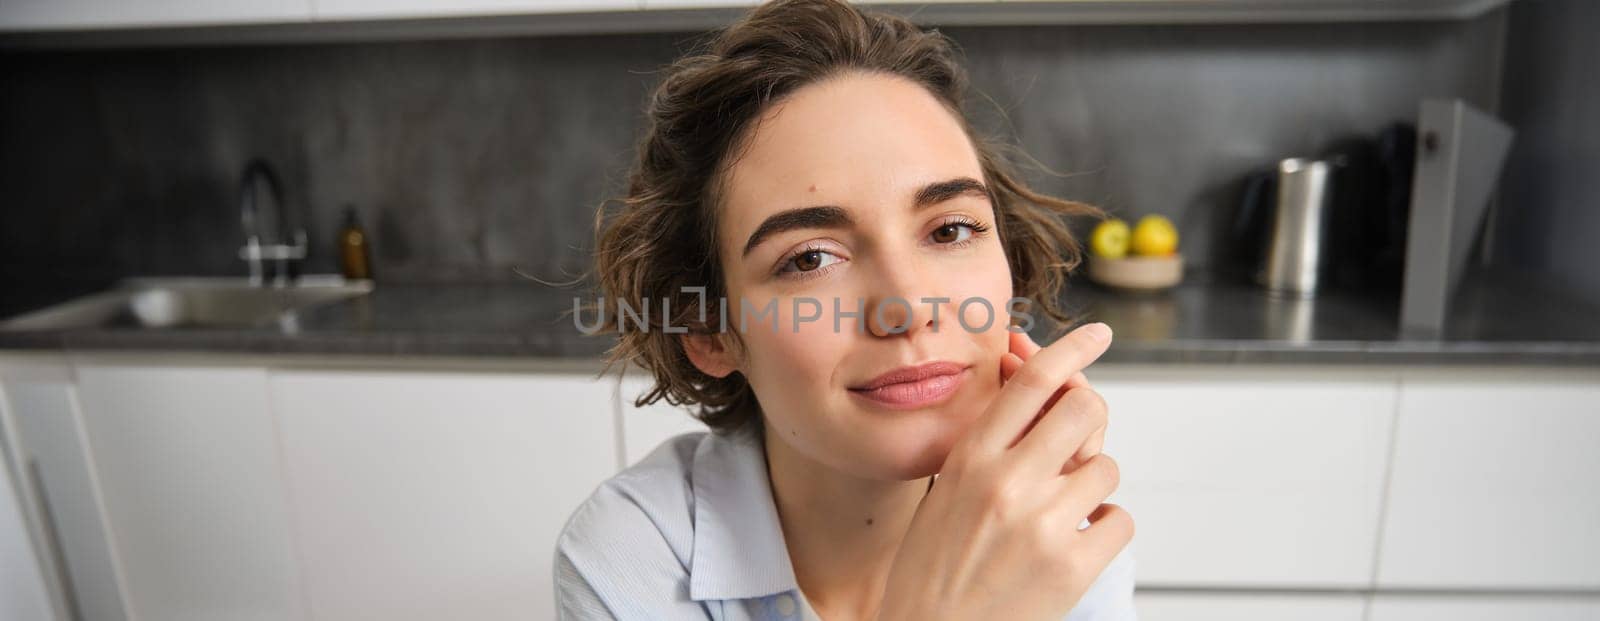 Close up portrait of young businesswoman, female entrepreneur, looking at camera and smiling with confidence, sitting at home in kitchen.